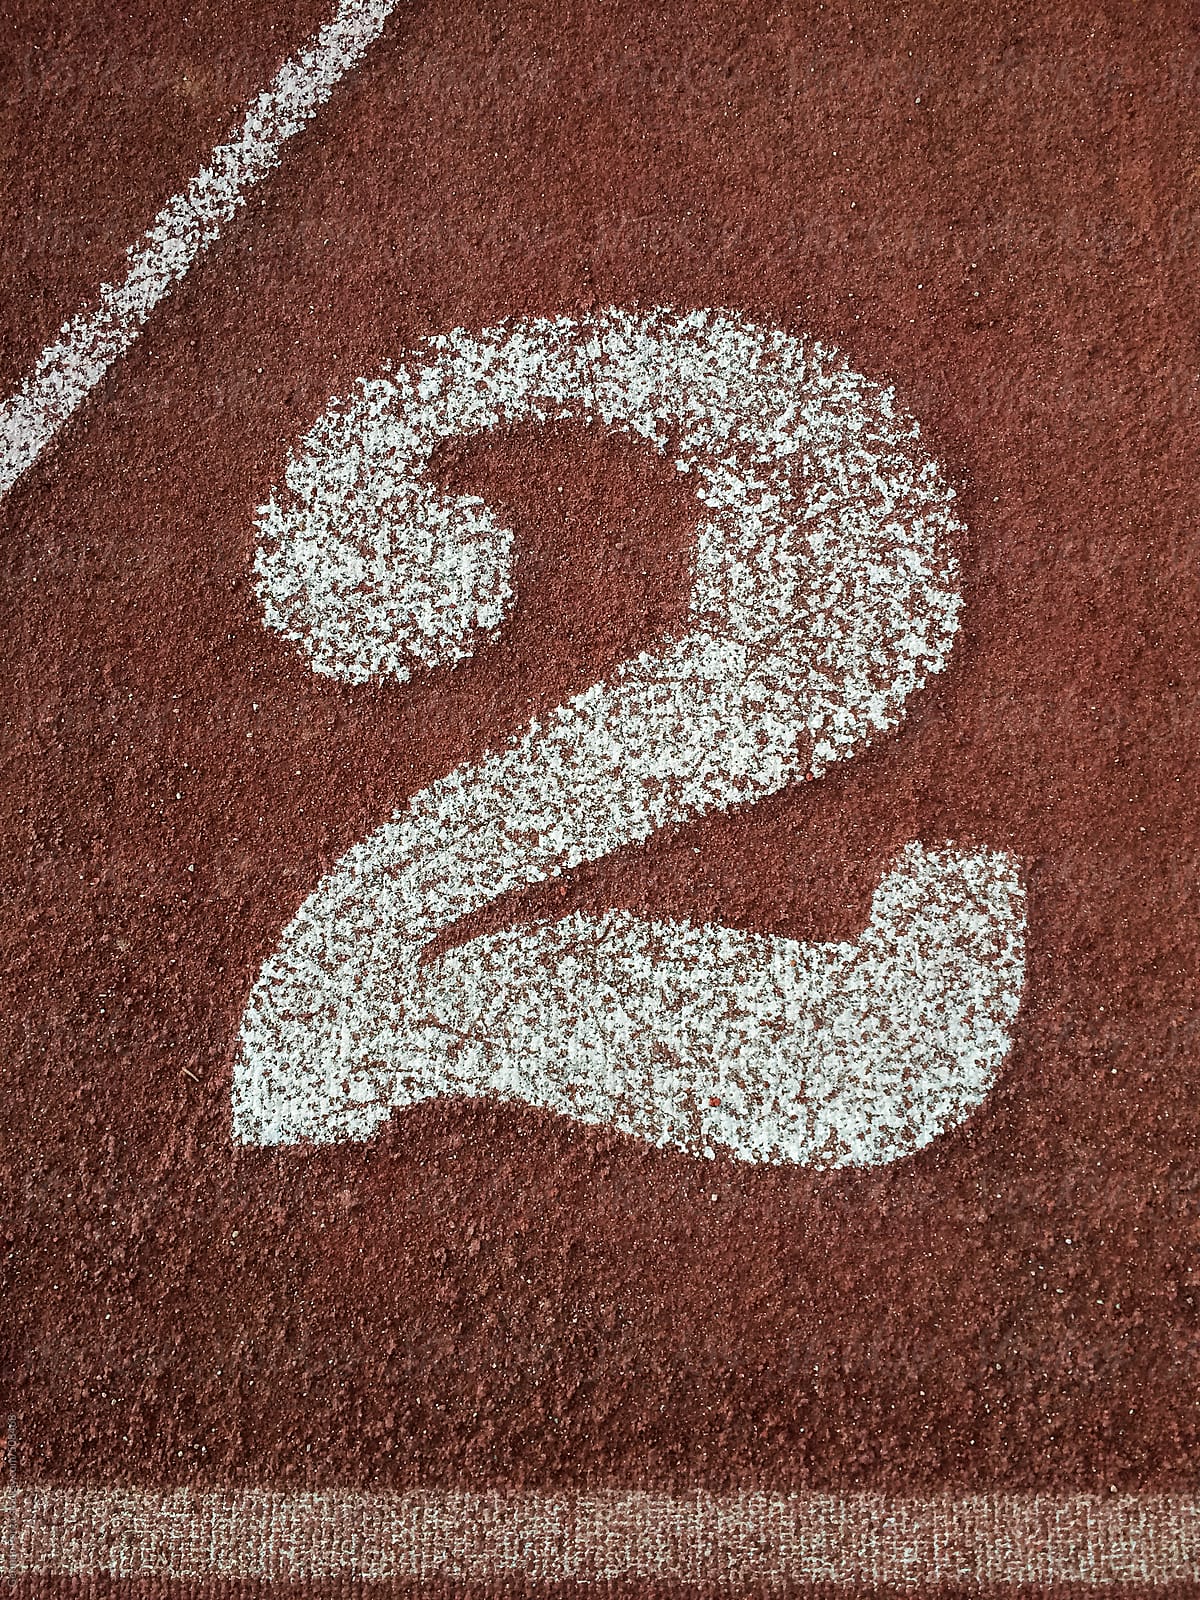 white number two painted on an running track